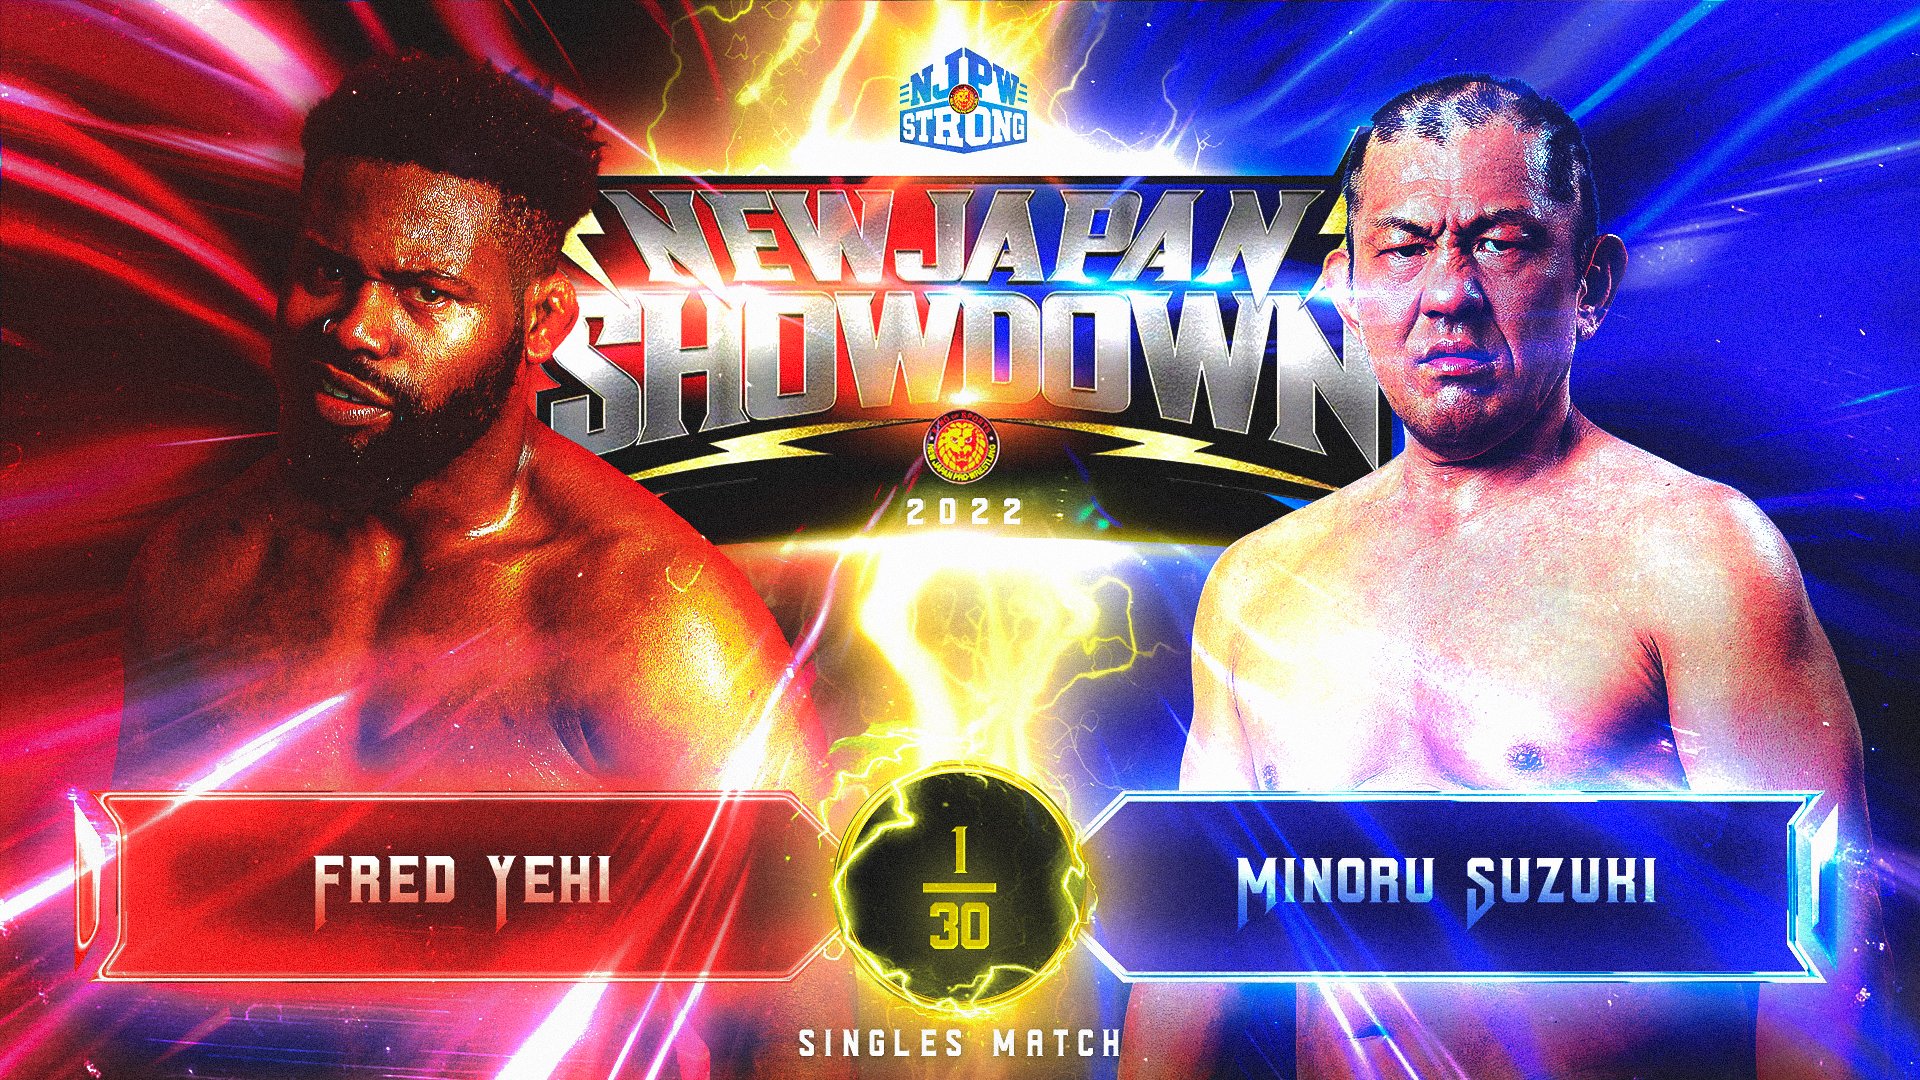 Huge Lineup Announced For 10/16 NJPW STRONG New Japan Showdown Taping